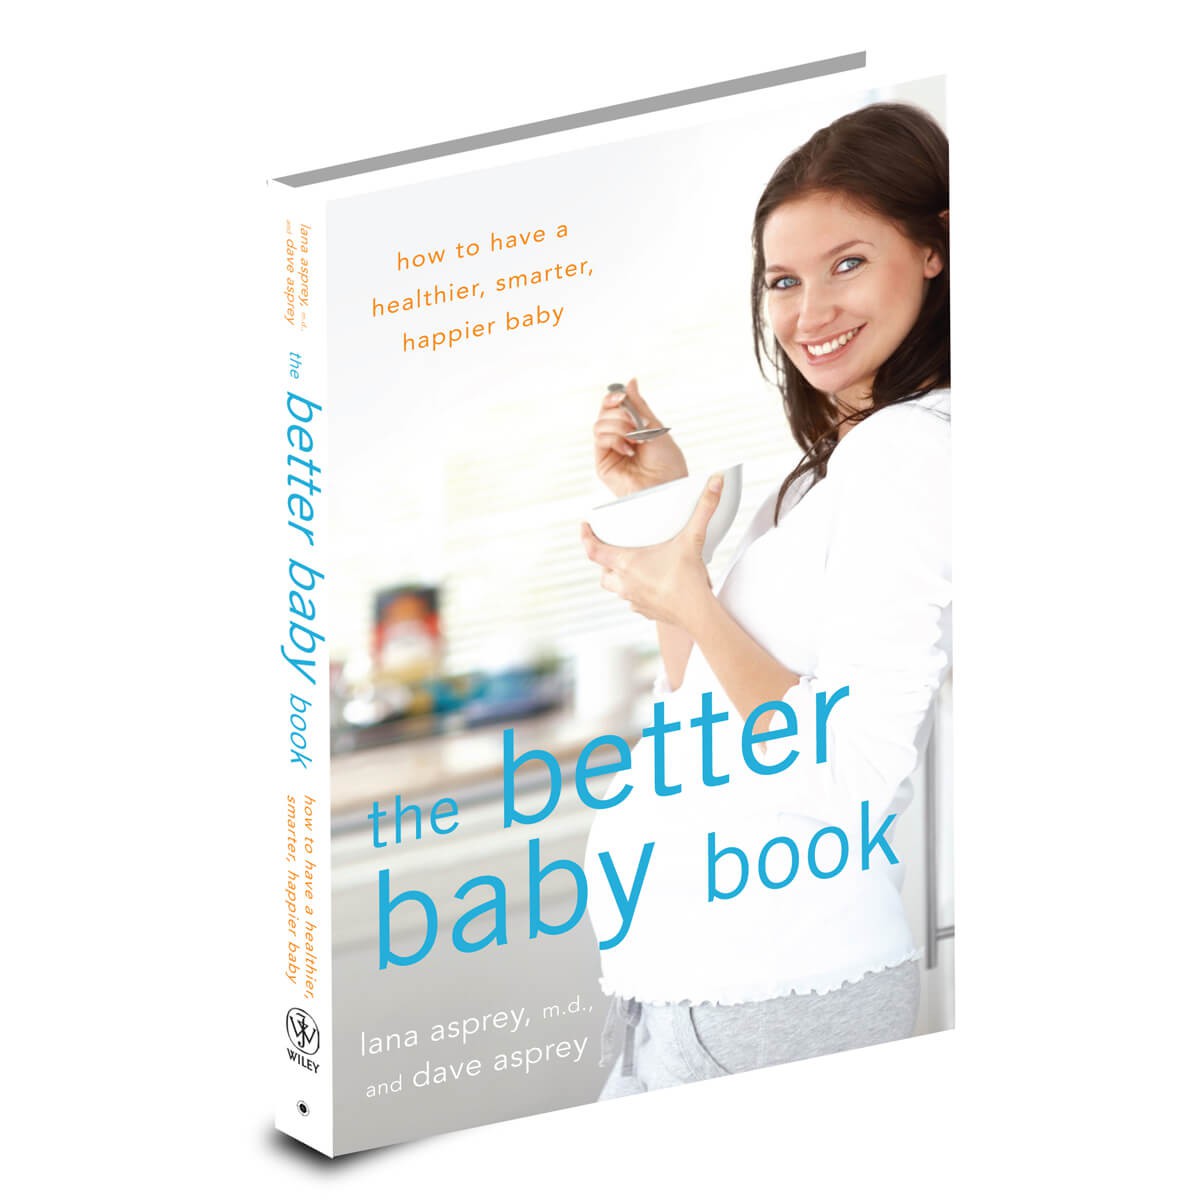 Better Baby Book from Butter Coffee Australia